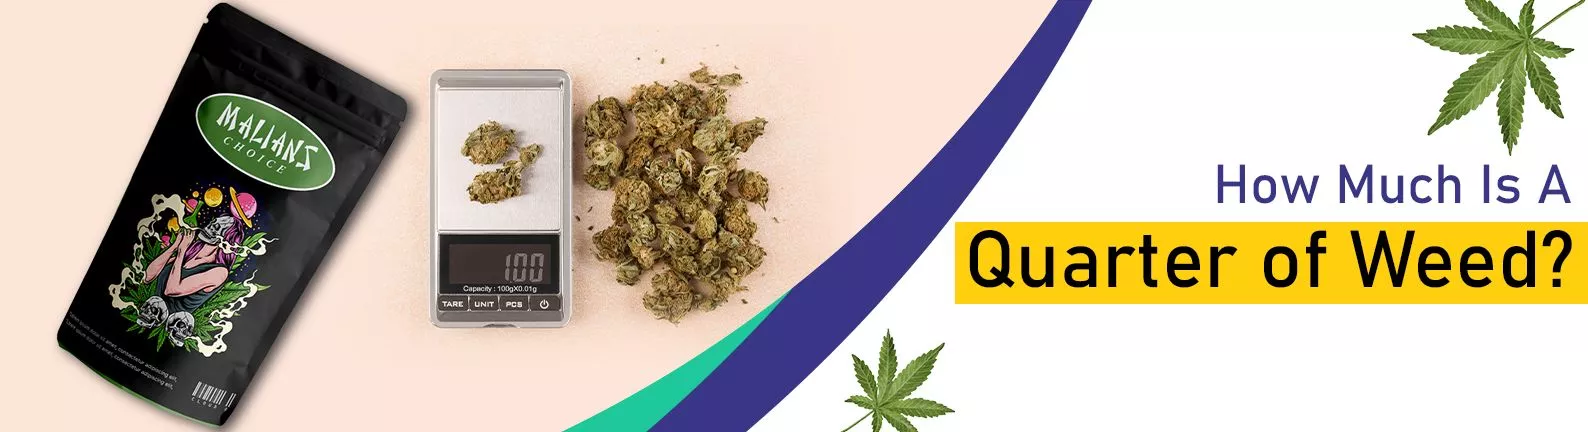 How-Much-Is-A-Quarter-of-Weed